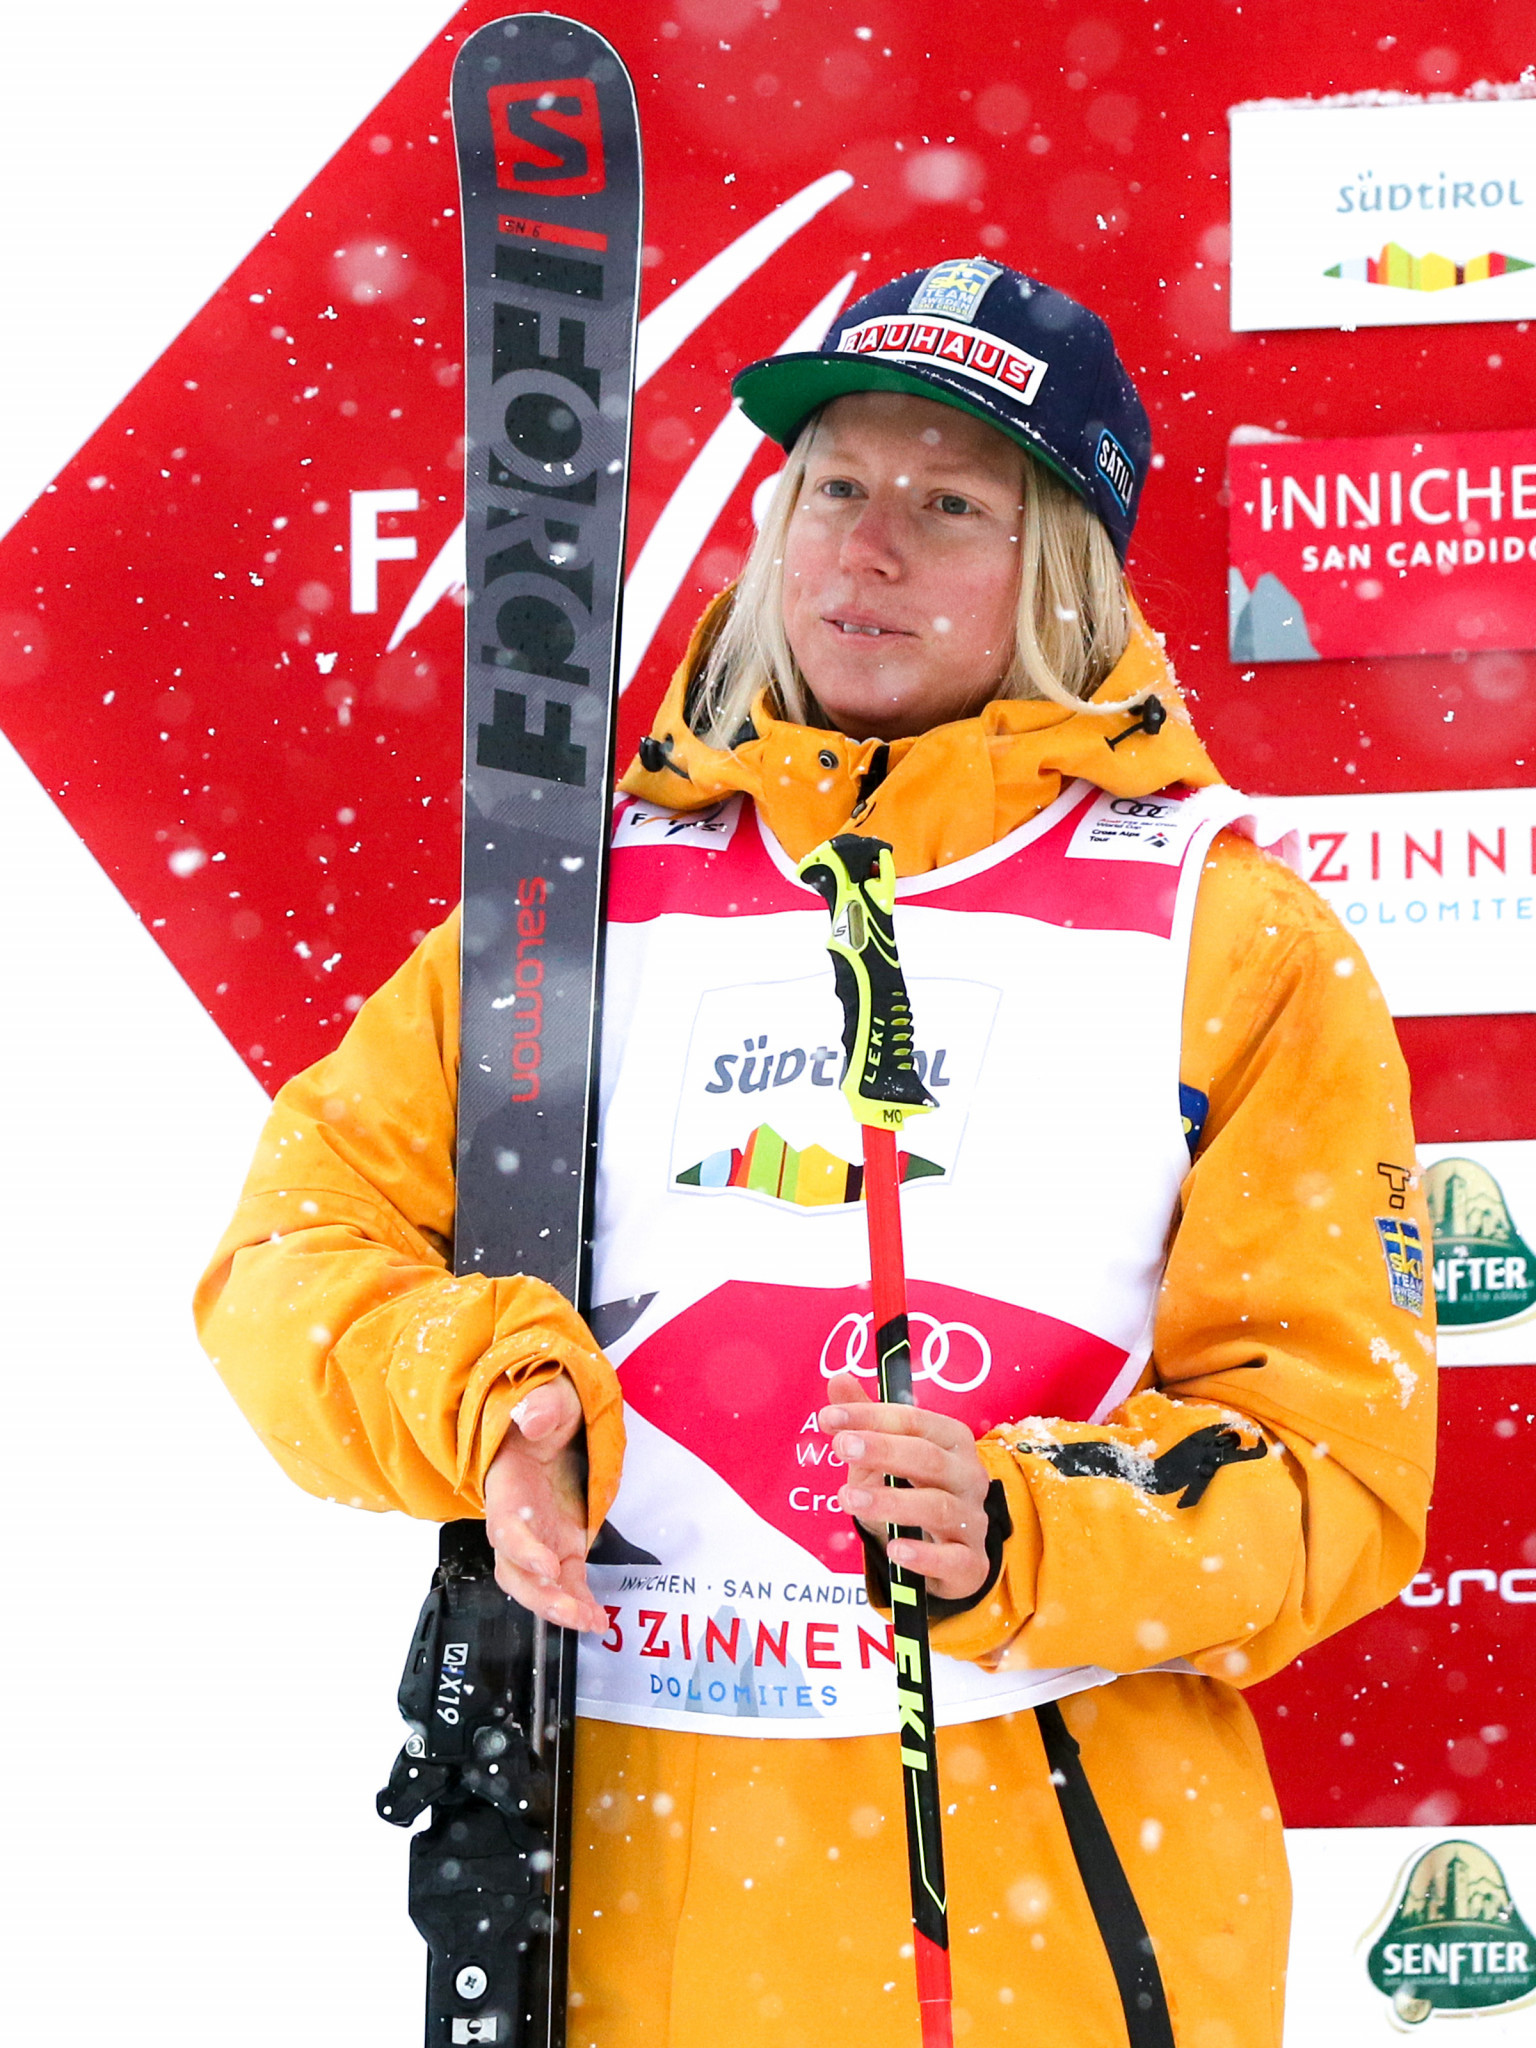 Sweden's Sandra Näslund won the women's event and heads the overall standings ©Getty Images